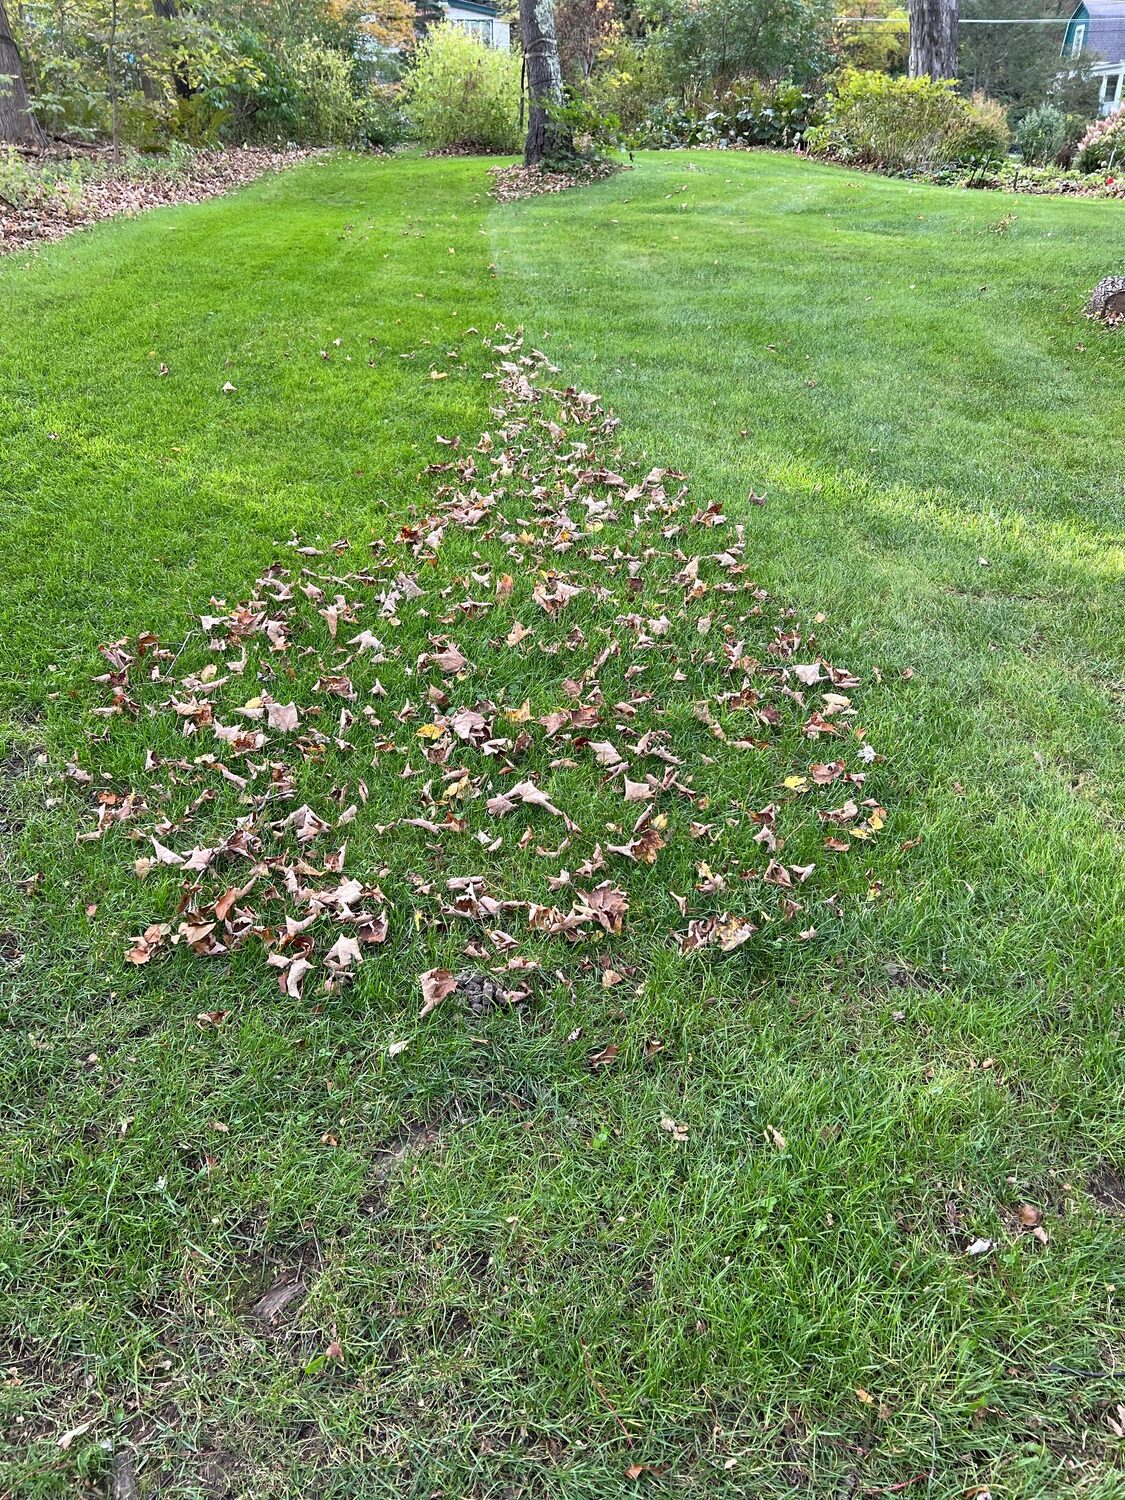 When mowing to cut grass and mulch leaves at the same time, start in the center and let the mower move the mulched material to the sides.  But a small miscalculation or bad planning can result in this problem. A quick once over with the mower will make this mistake disappear in seconds though. ANDREW MESSINGER